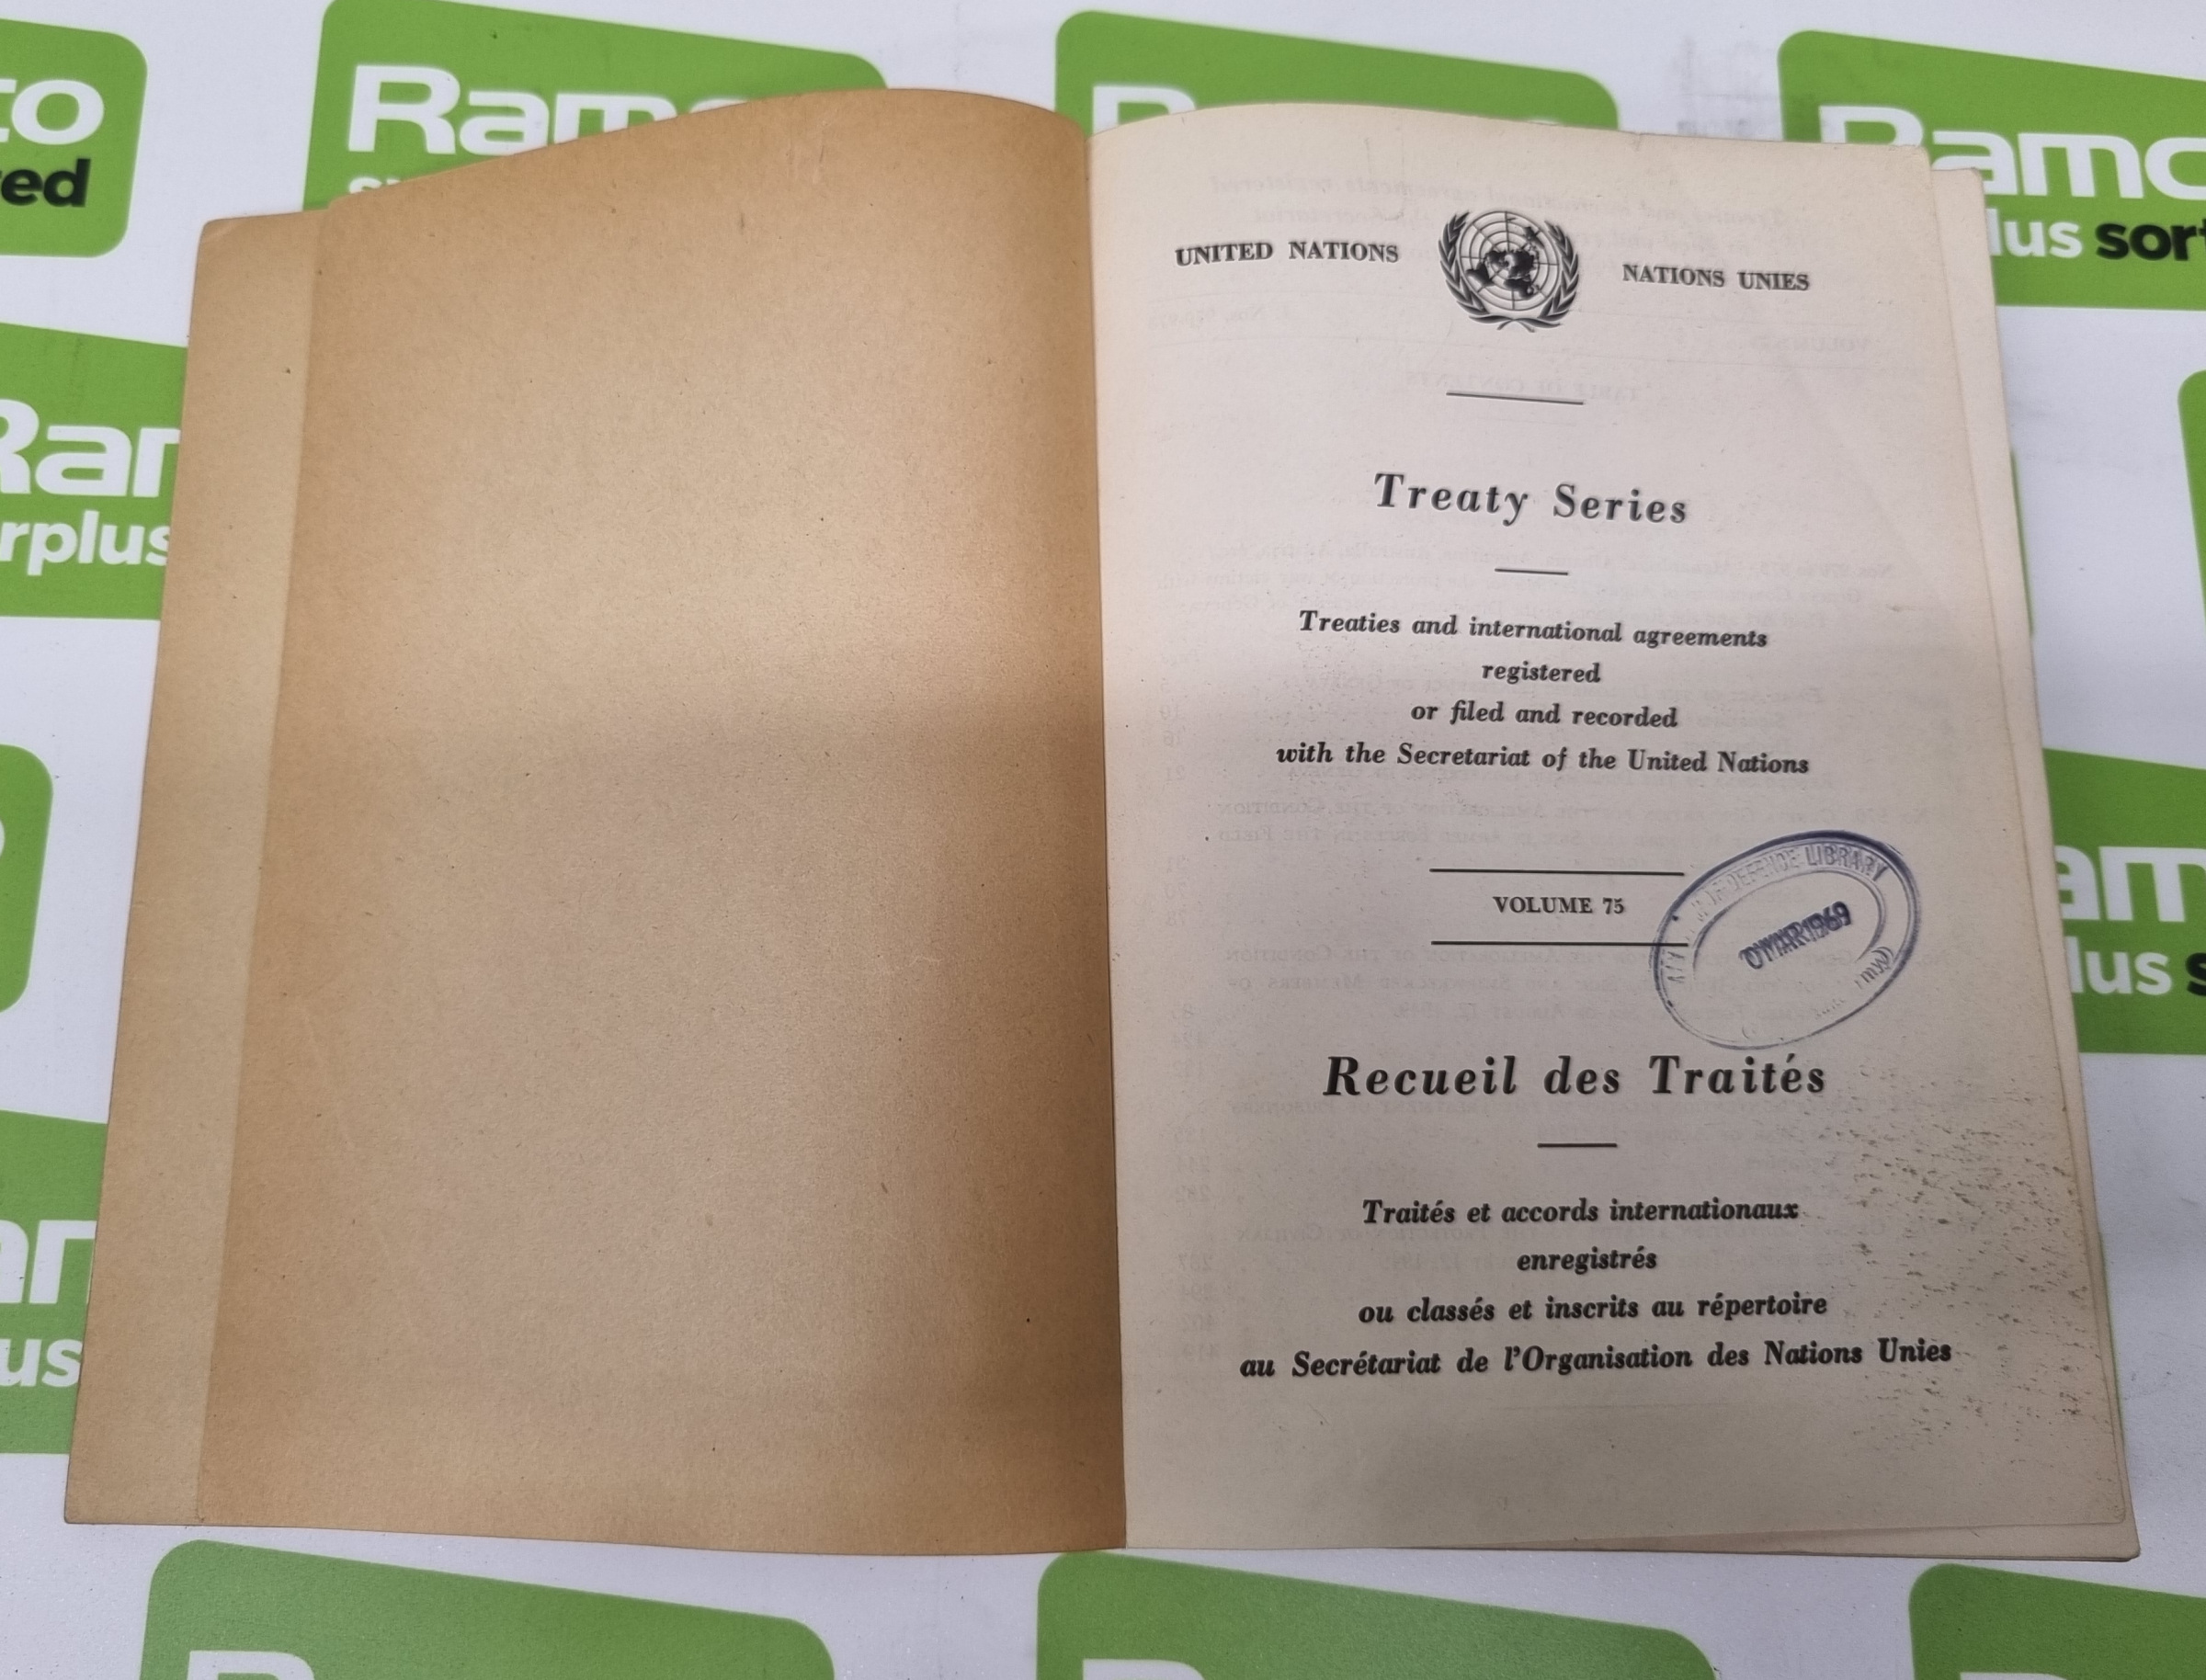 United Nations Treaty Series Volumes 71-80 - Published 1950/1951 - Ex-War Office Library Books - Image 11 of 22